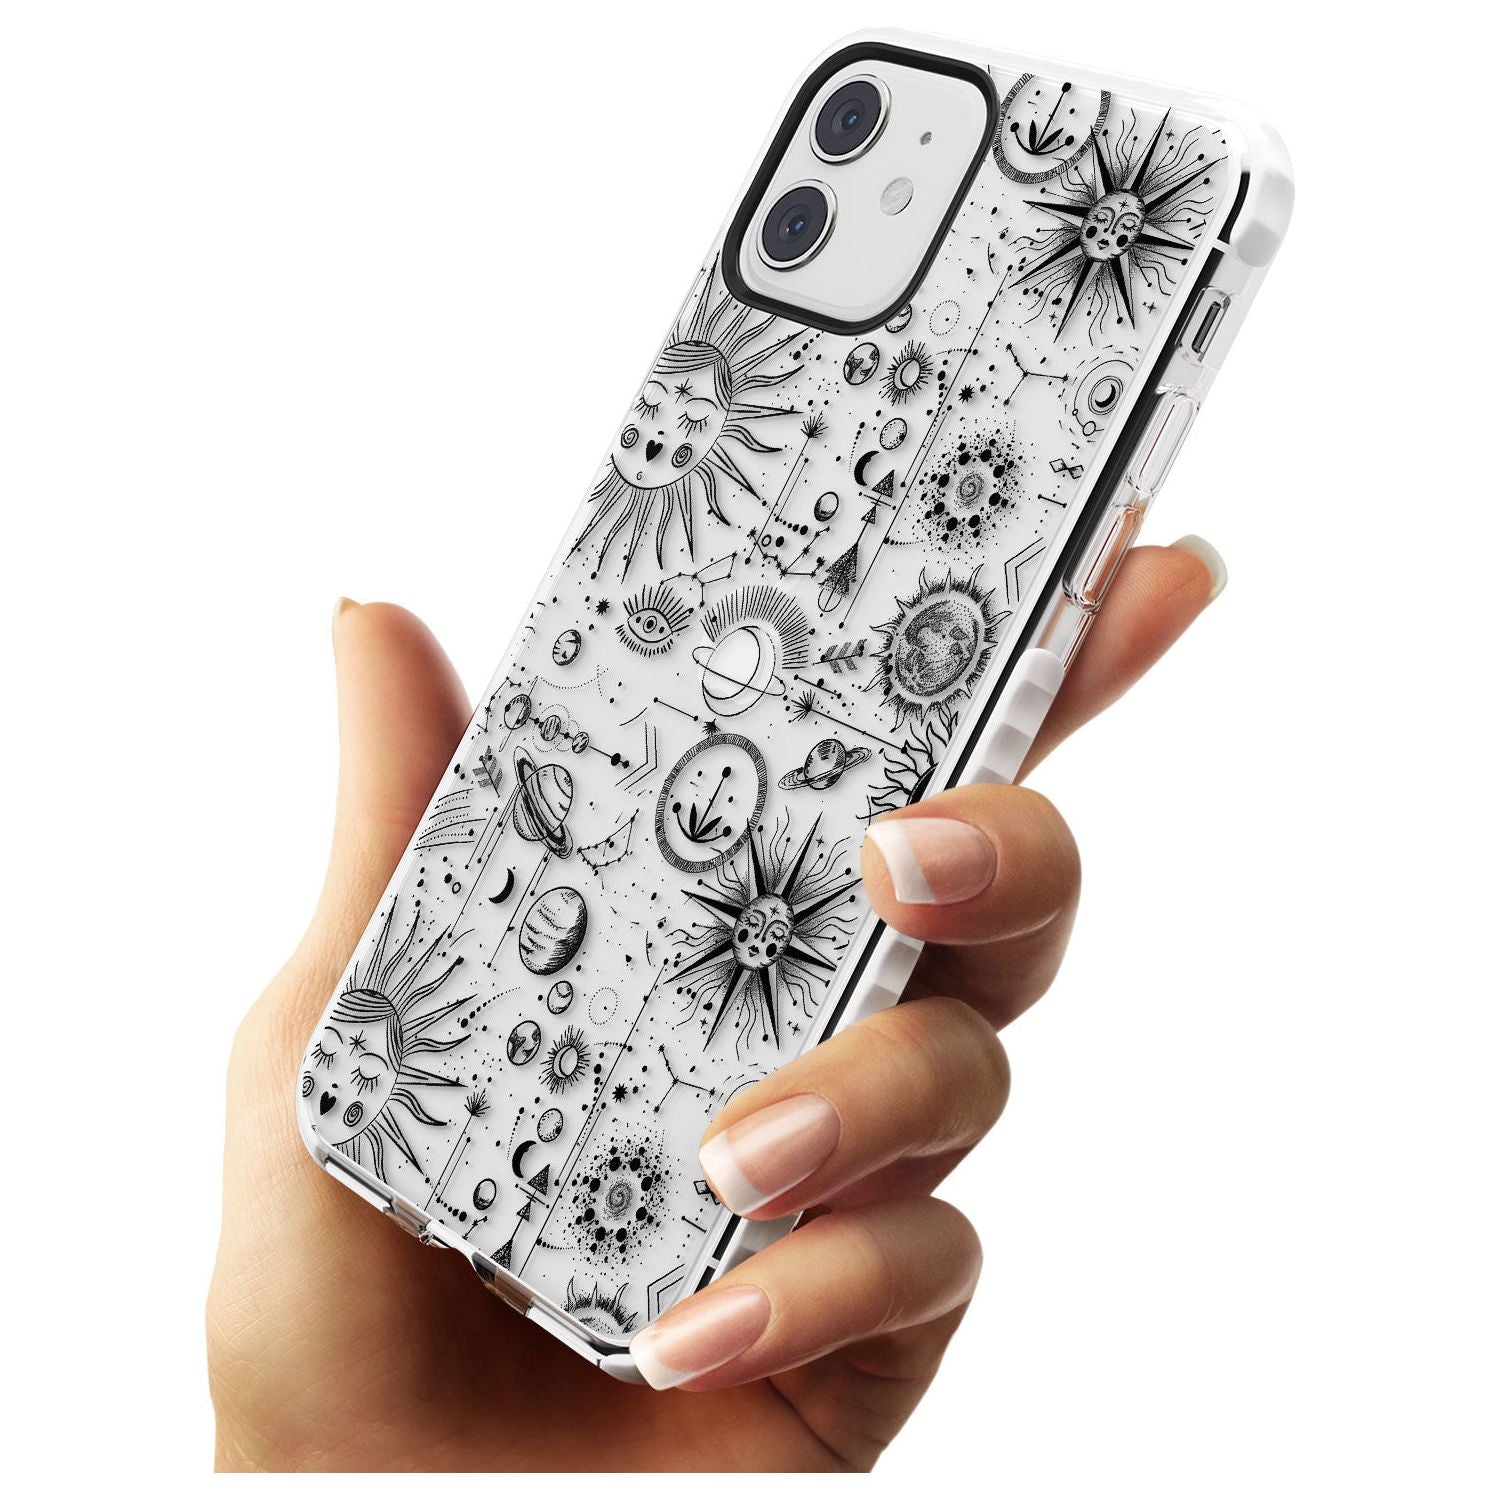 Suns & Planets Vintage Astrological Impact Phone Case for iPhone 11